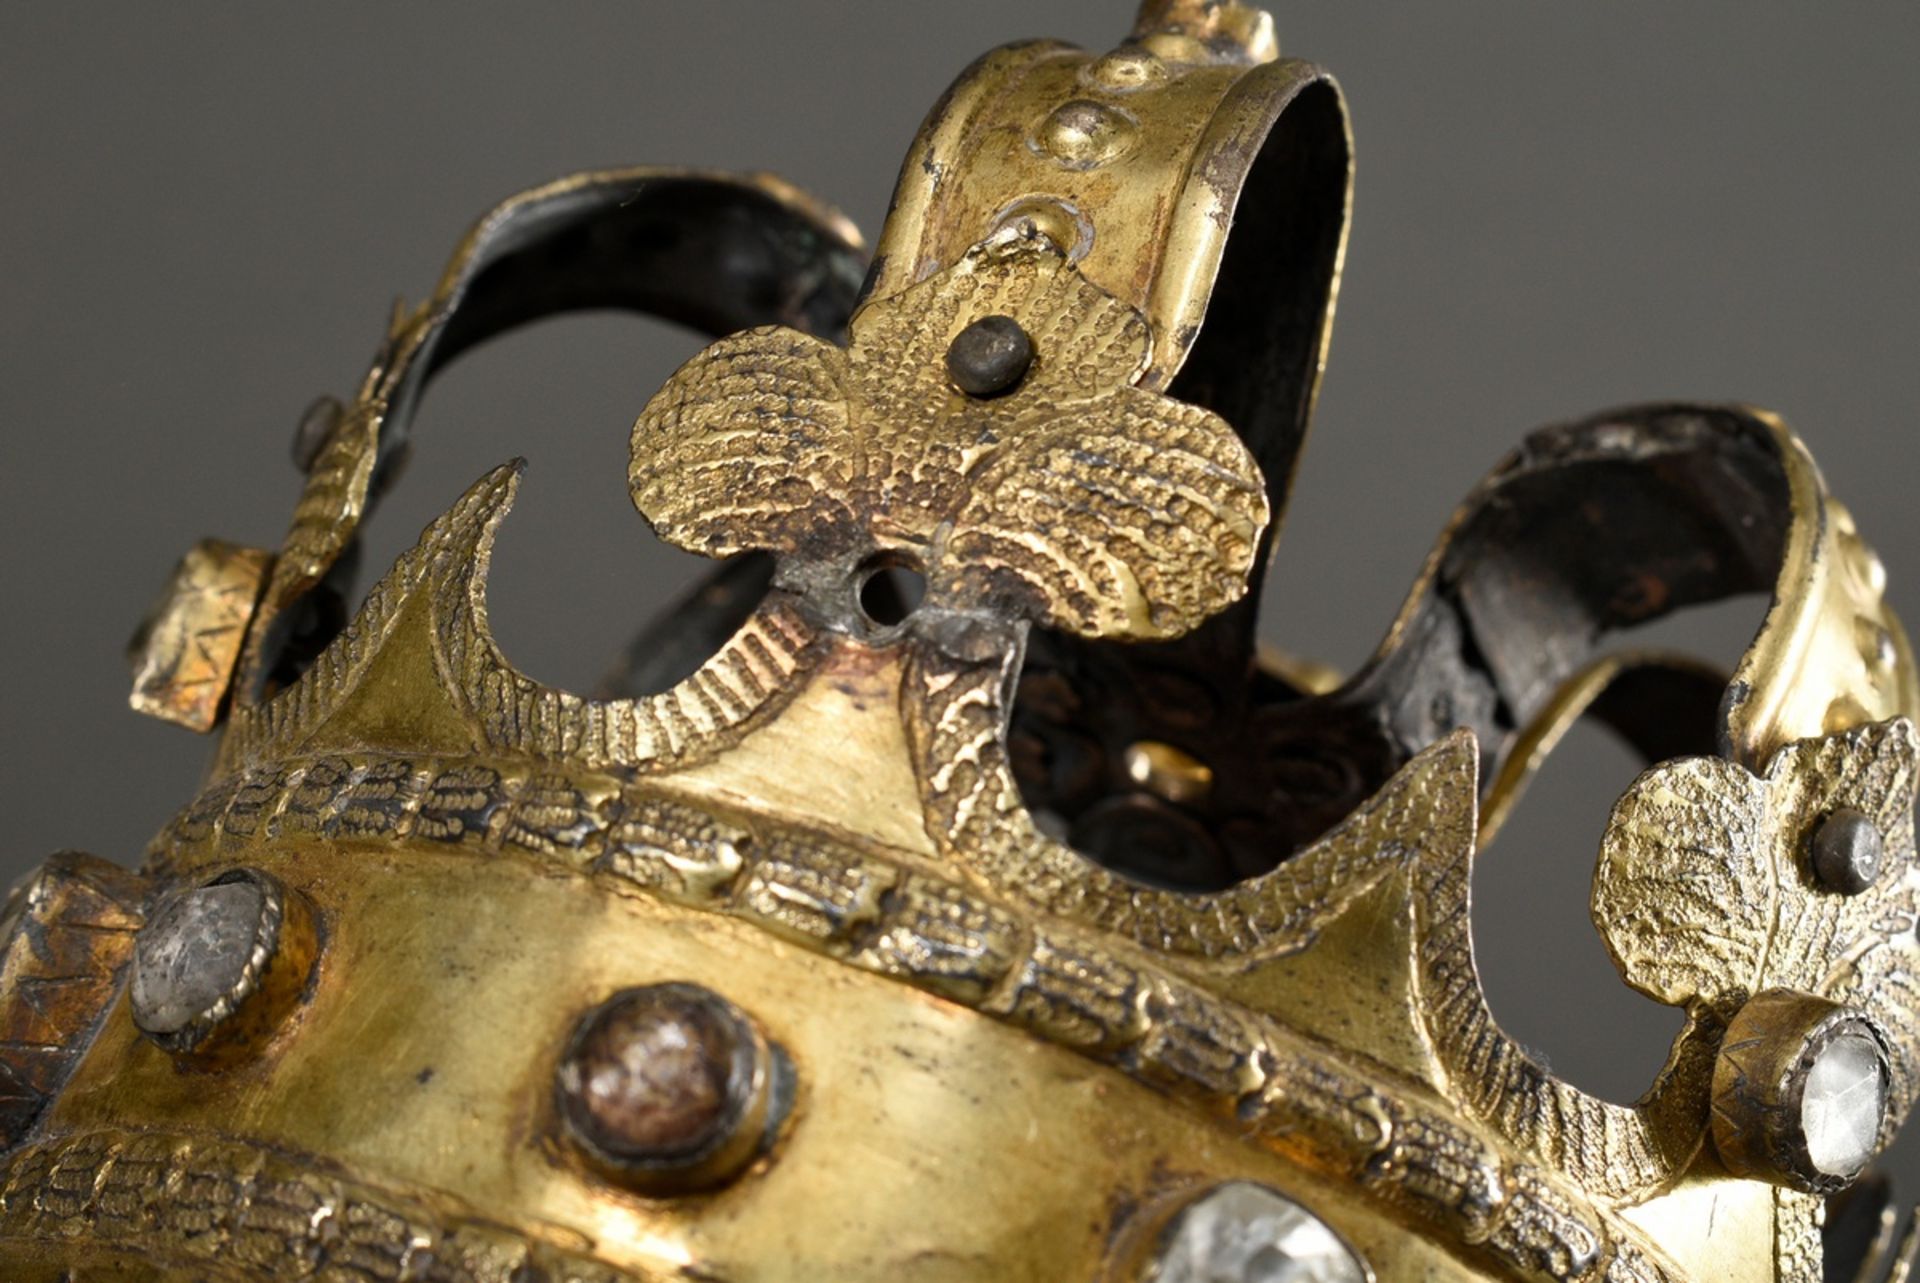 Antique crown of the Virgin Mary with glass stones, probably South German, 19th century, gilt metal - Image 8 of 9